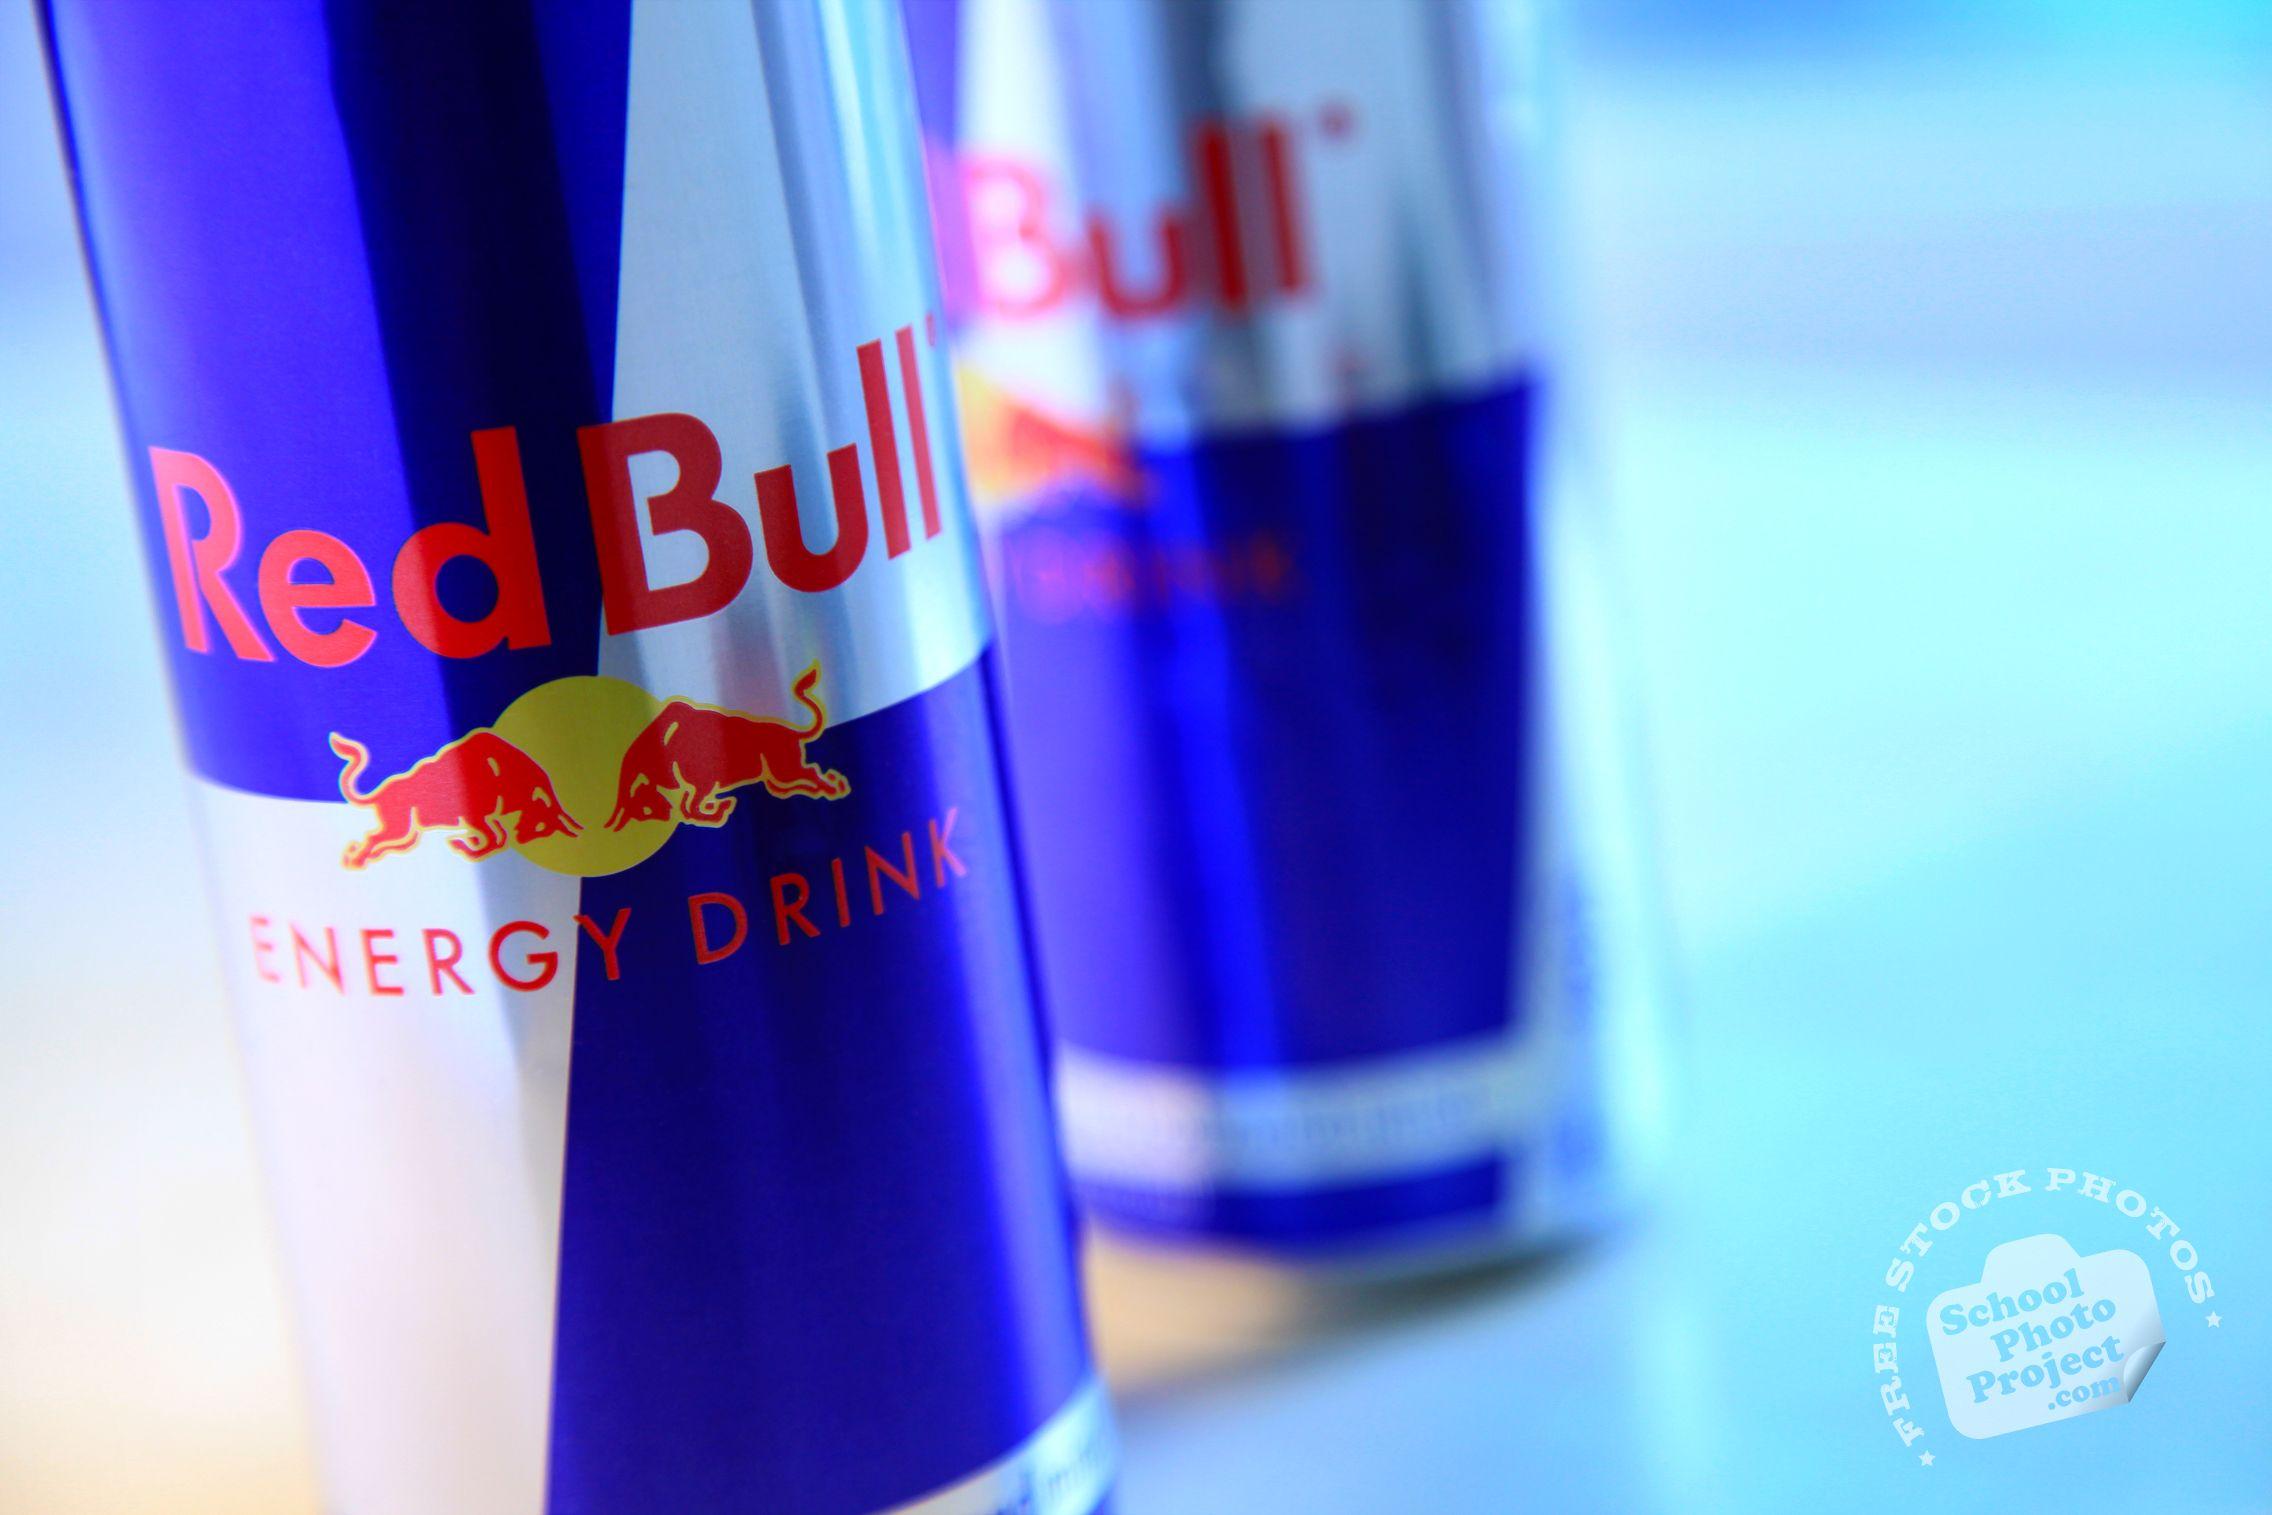 Red Bull Can Logo - Red Bull, FREE Stock Photo, Image, Picture: Red Bull Logo, Royalty ...